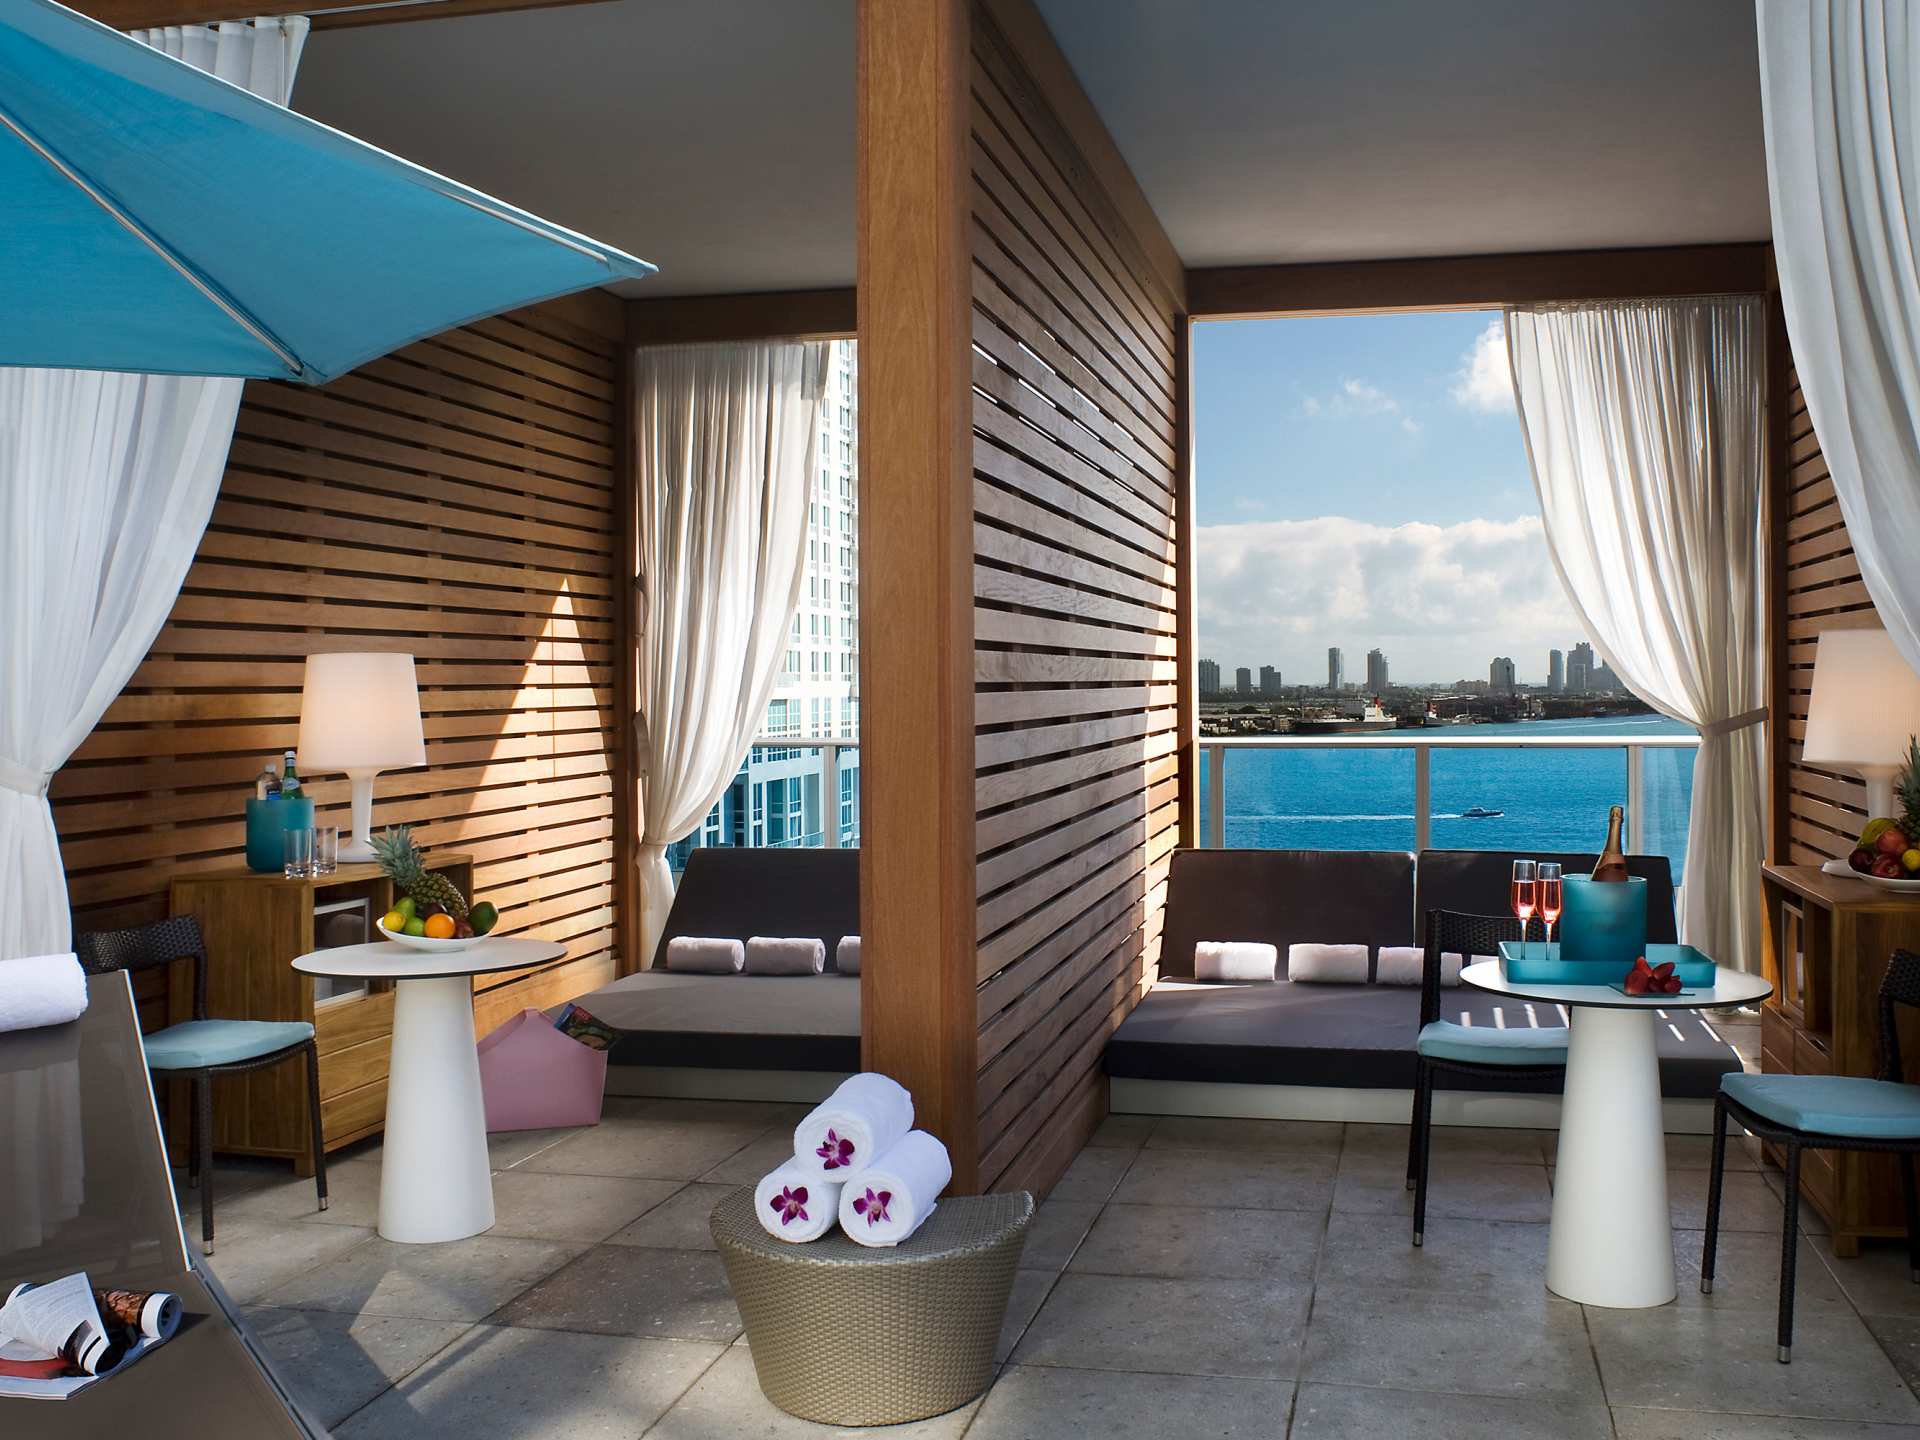 Private cabanas around the rooftop pool at the Kimpton EPIC Miami